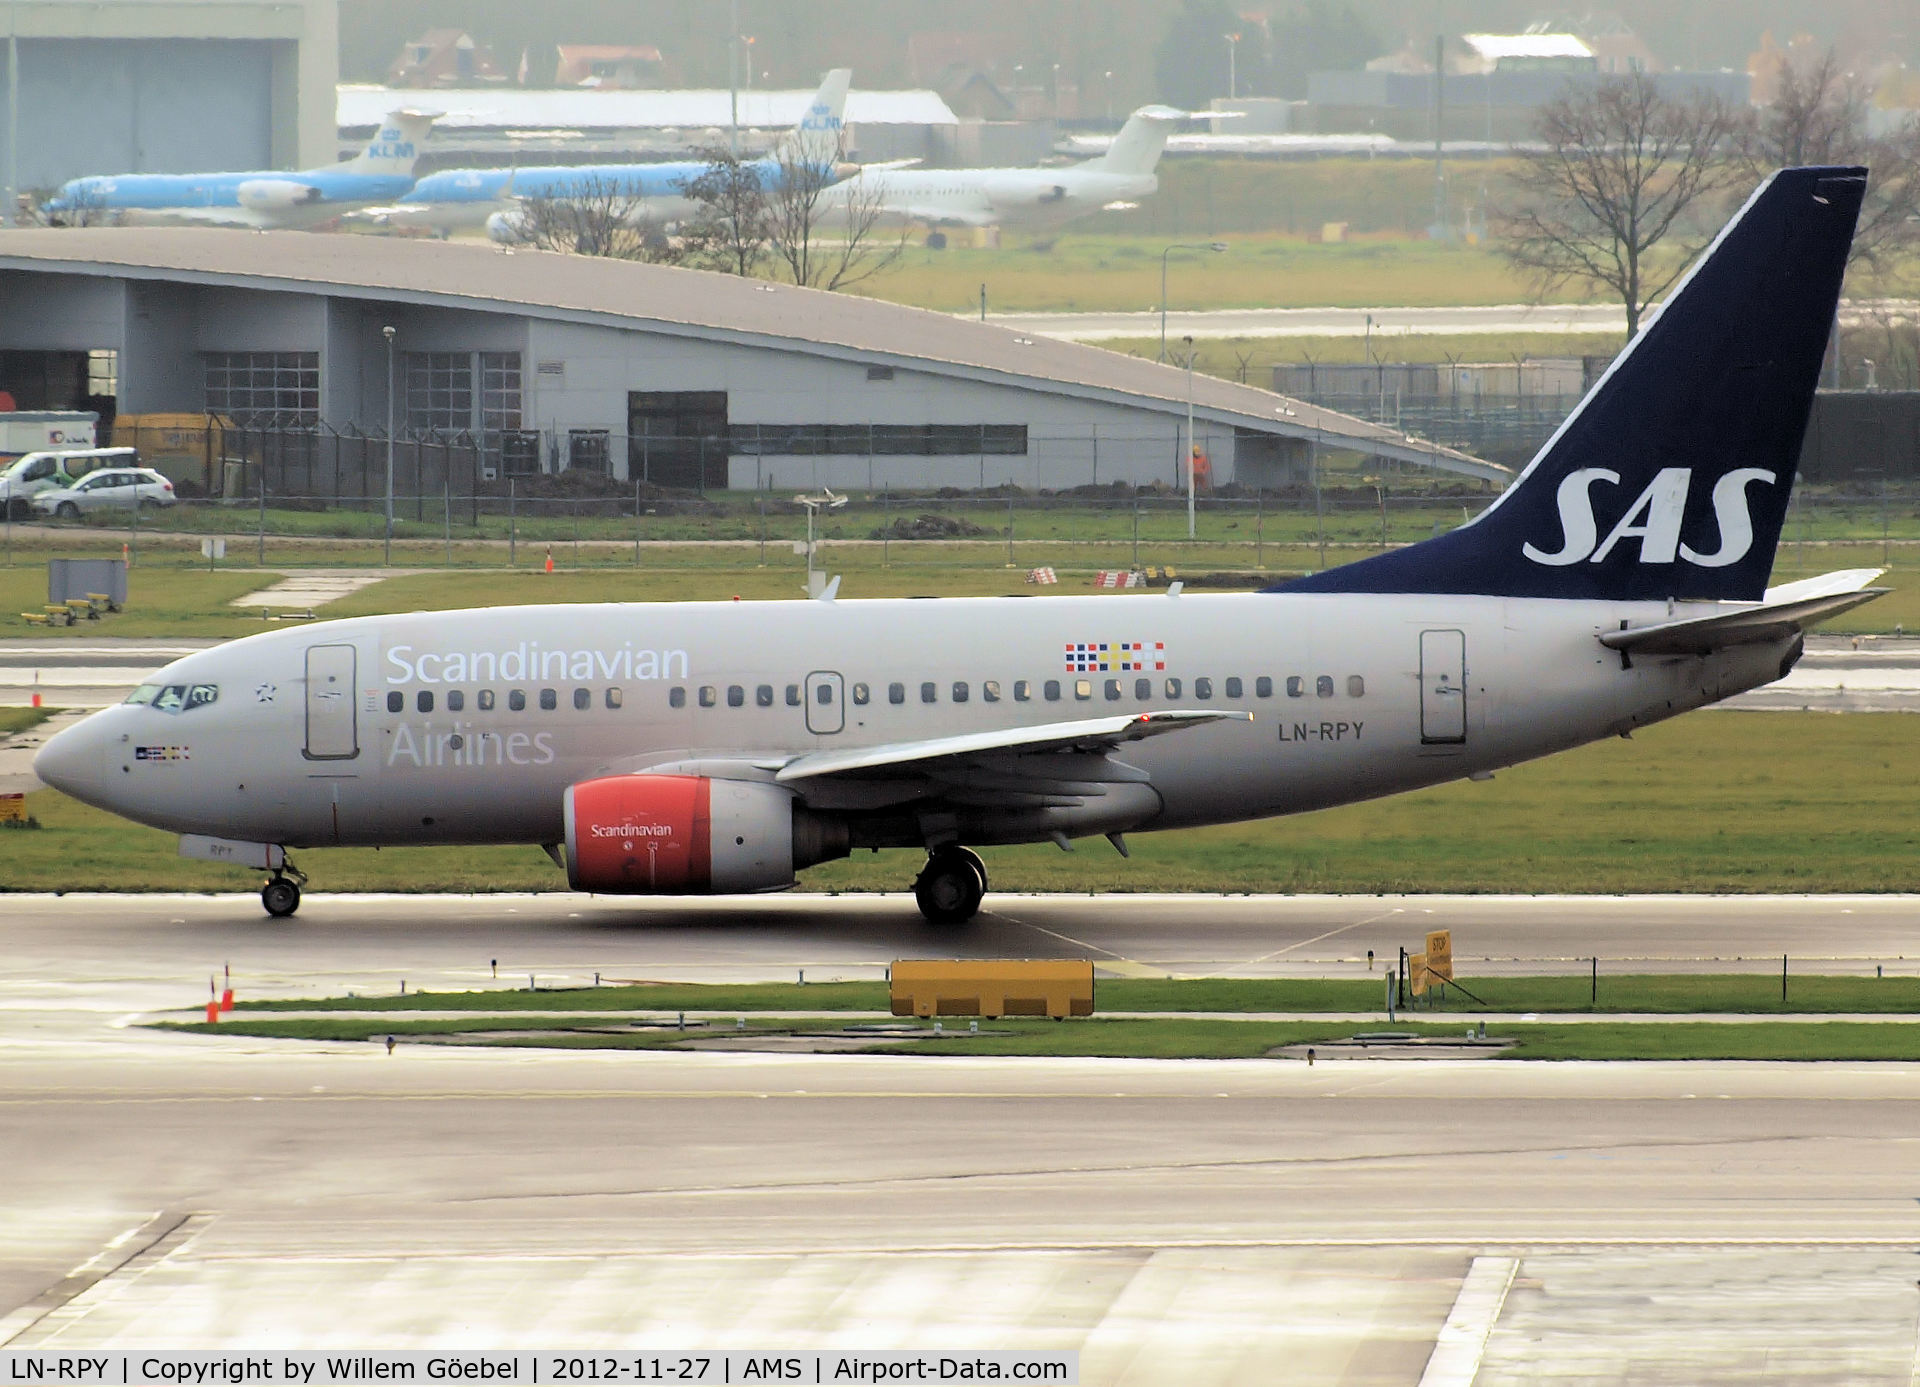 LN-RPY, 1998 Boeing 737-683 C/N 28292, Taxi to runway 24 of Schiphol Airport